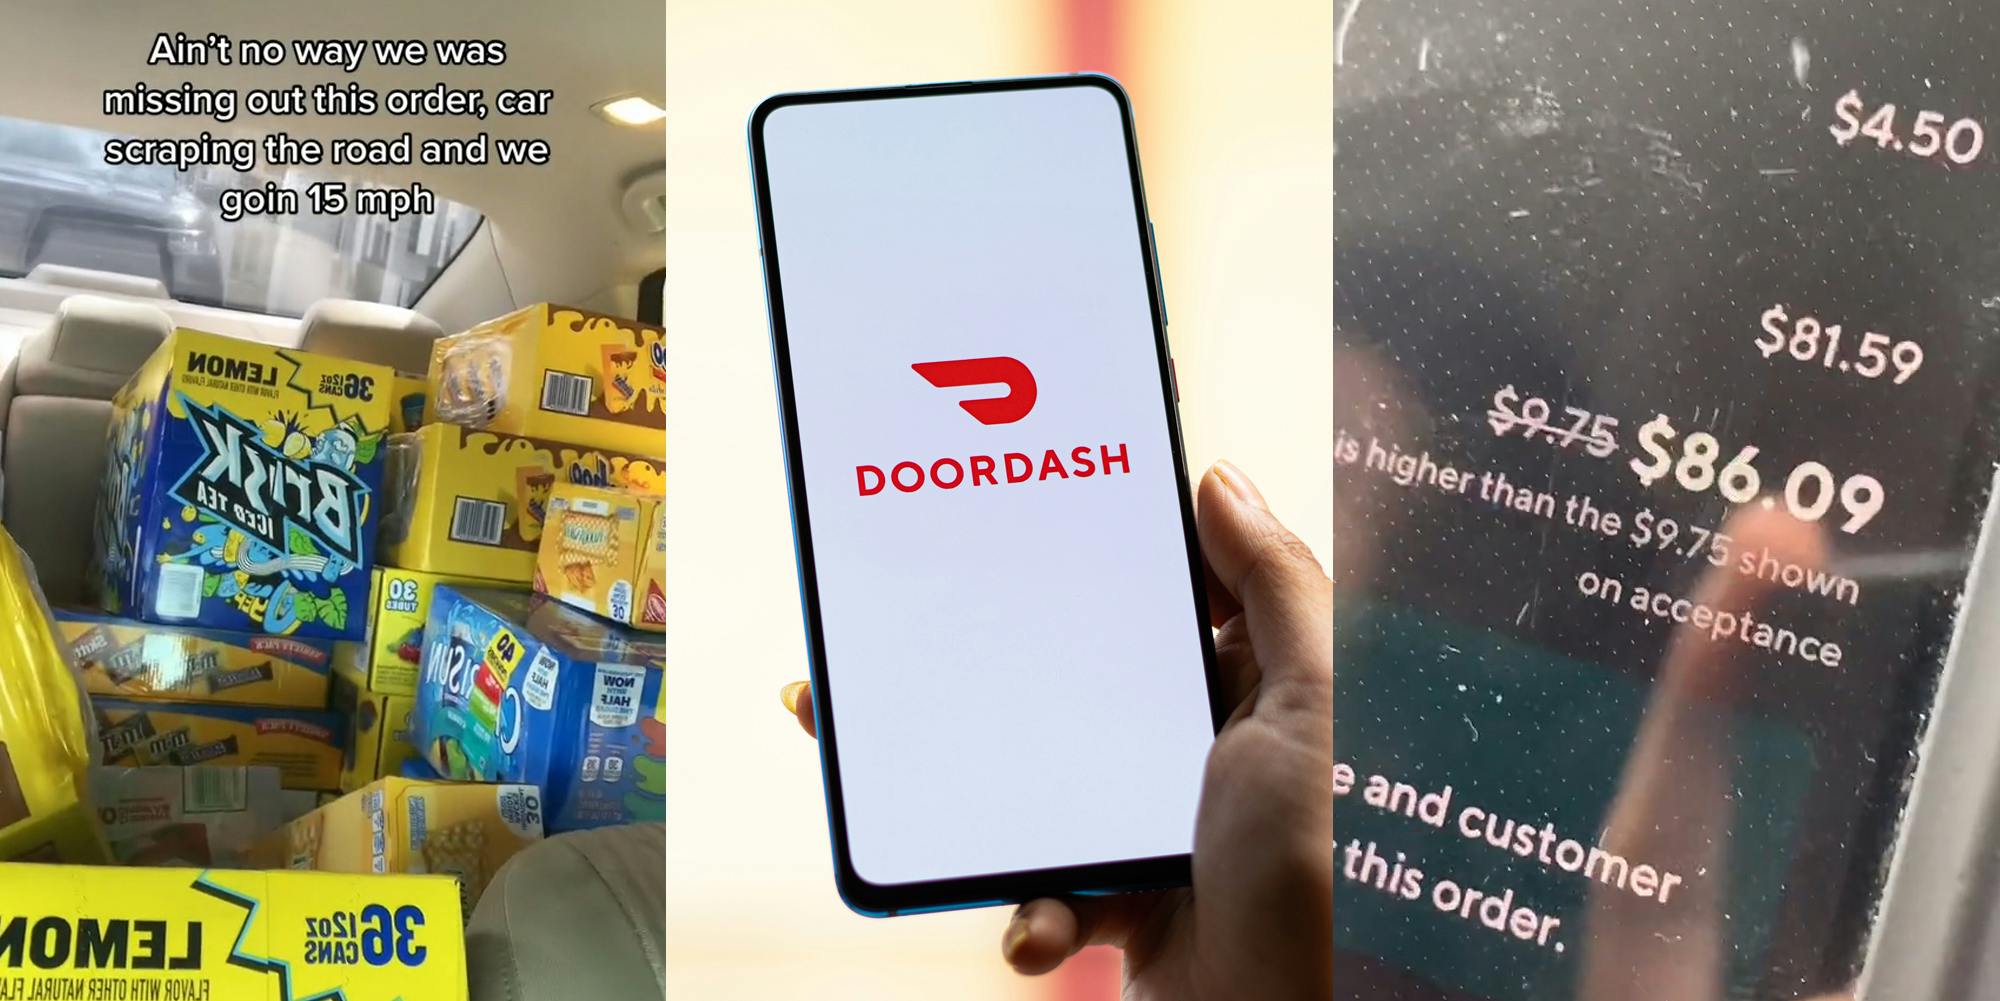 DoorDash driver's back seat of car filled with drinks with caption "Ain't no way we was missing out this order, car scraping the road and we goin 15 mph" (l) hand holding phone with DoorDash on screen in front of tan blurred background (c) DoorDash driver's phone with $86.09 on screen (r)